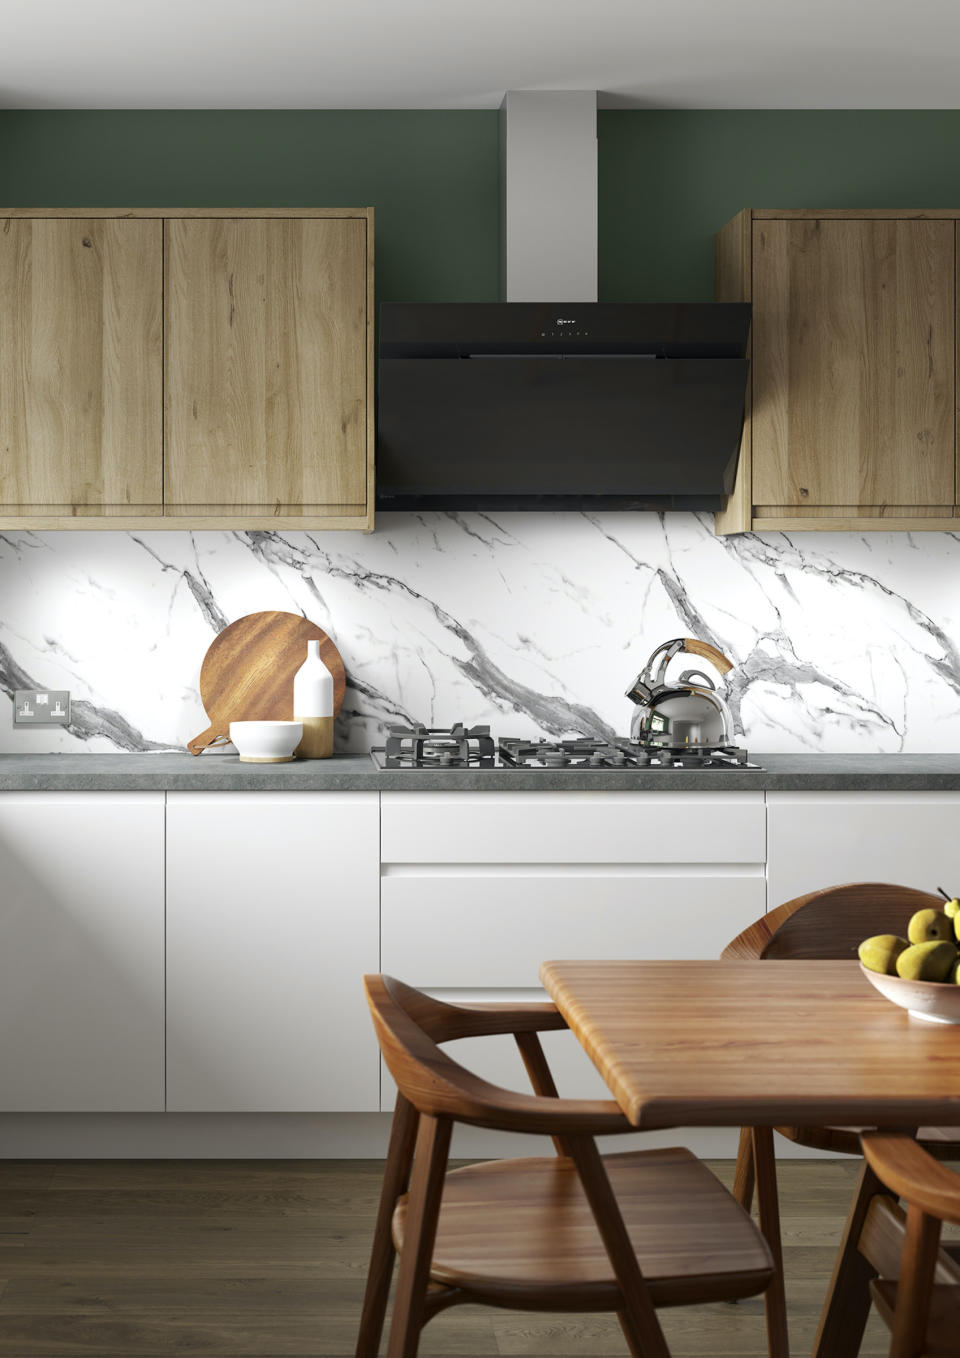 13. Soften white cabinetry with wood and marble